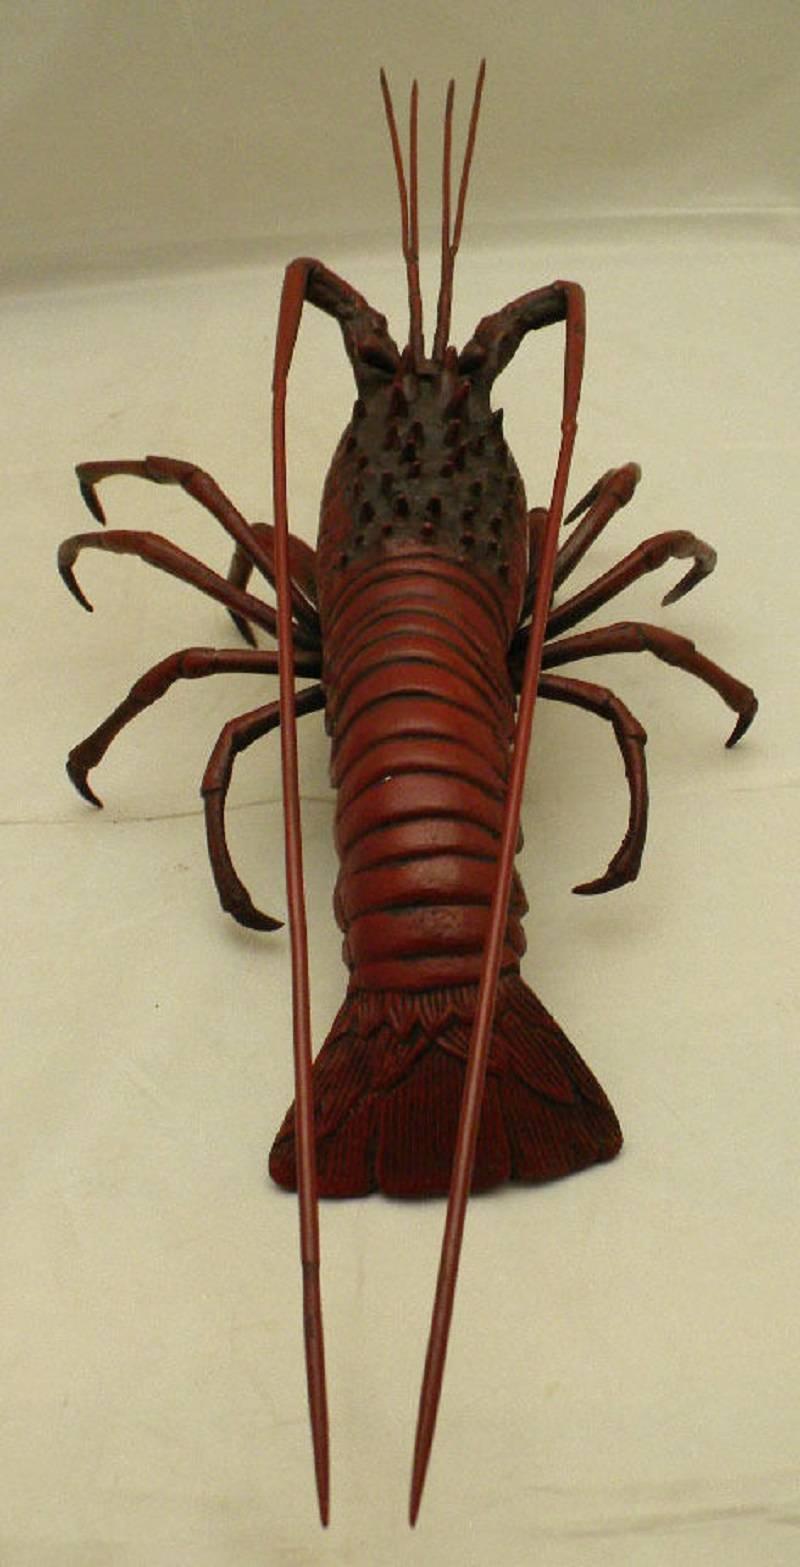 Taisho Japan Antique Jumbo Red Lobster Sculpture Realistic Best in Class  FREE SHIPPING